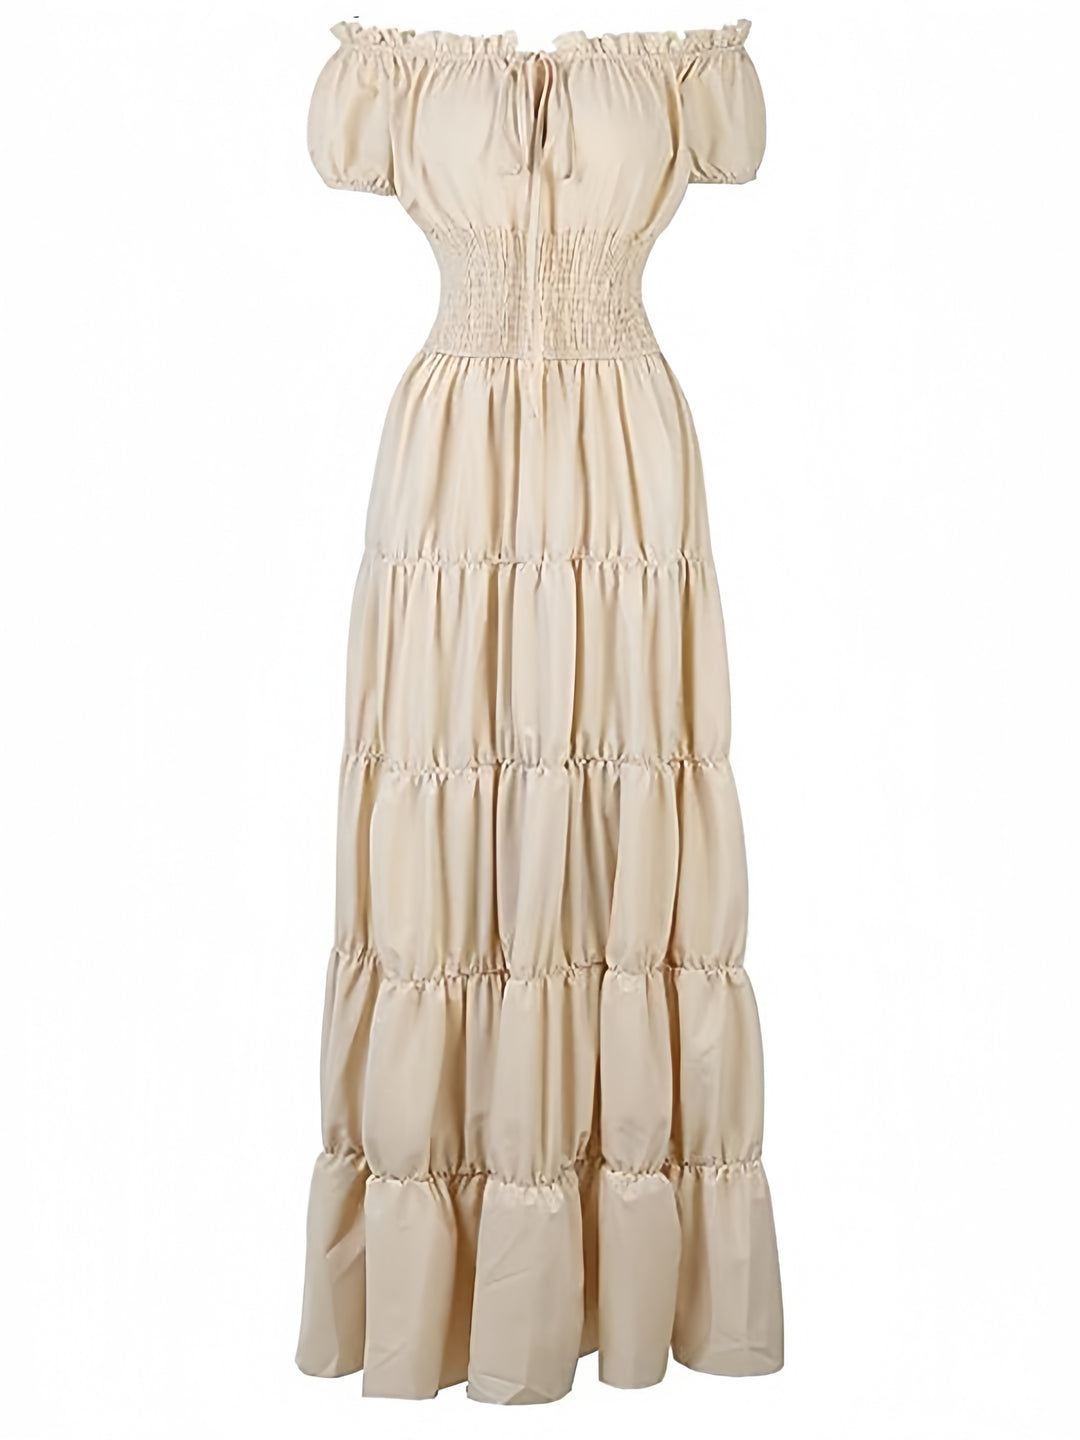 A-Line/Princess Strapless Sleeveless Ankle-Length Vintage Dress with Ruffles